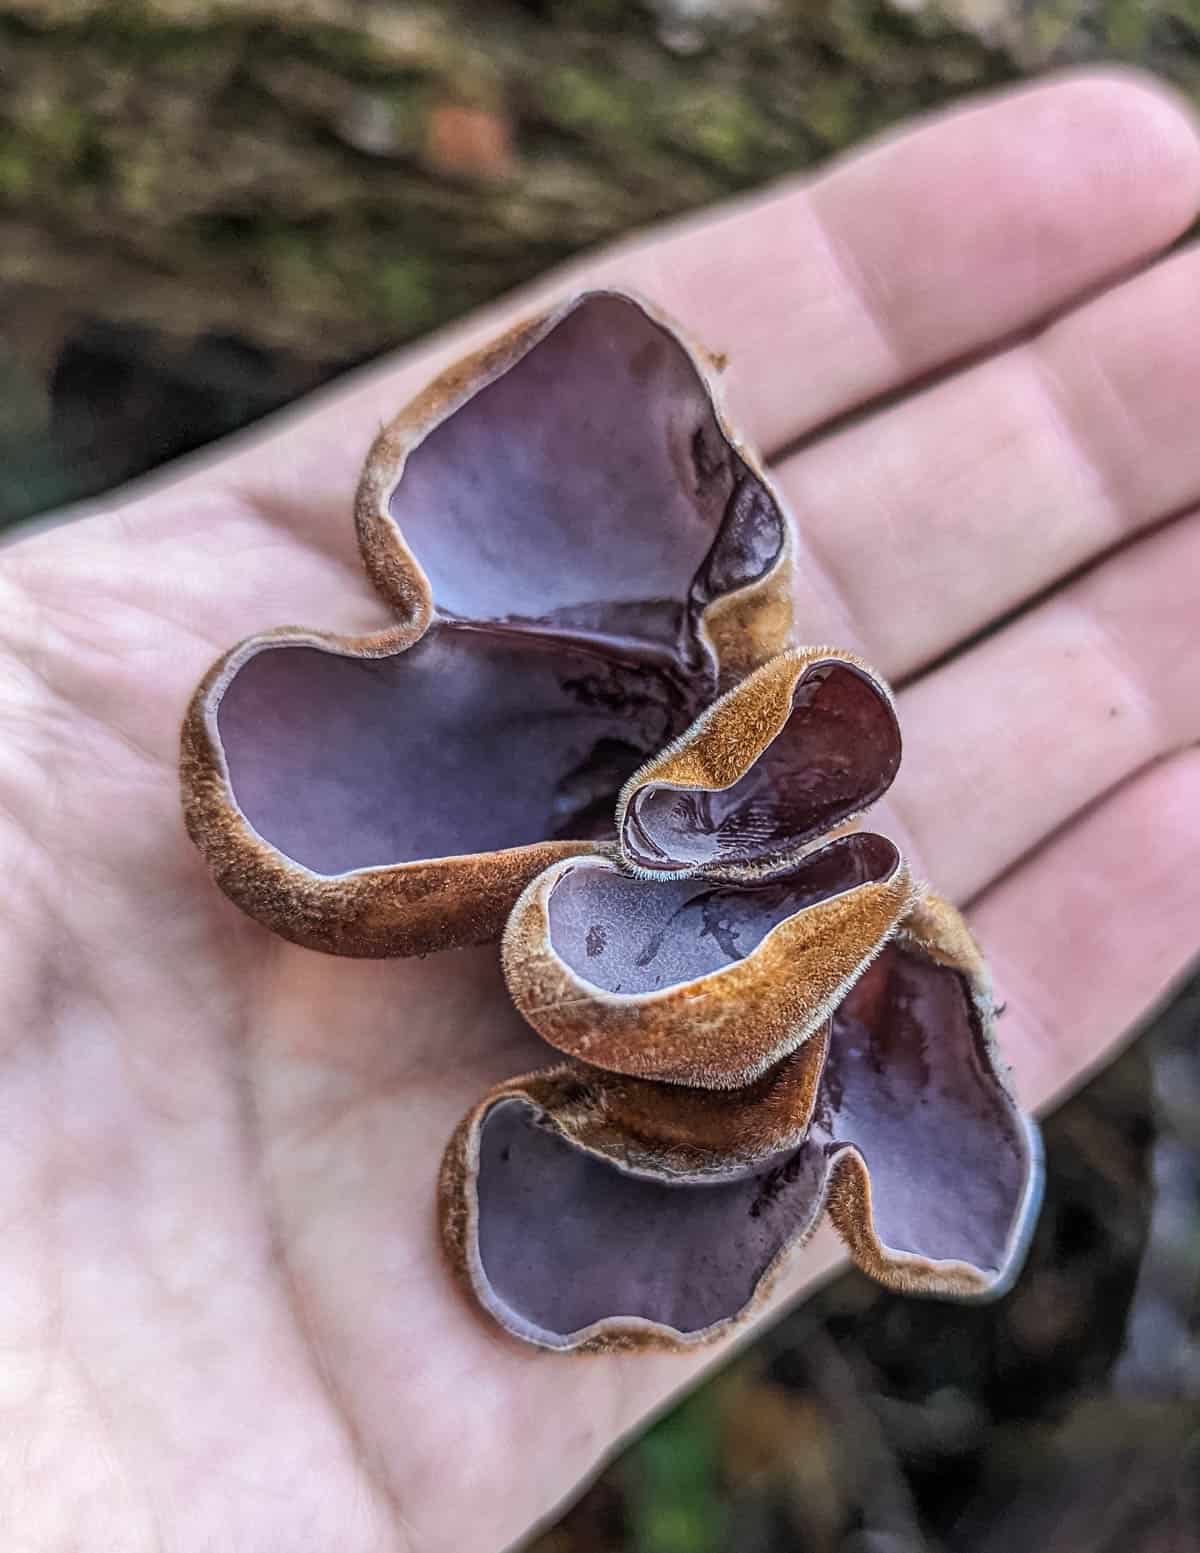 A hand holding fresh wood ear mushrooms (Auricularia) showing bloom on the hymenium) 